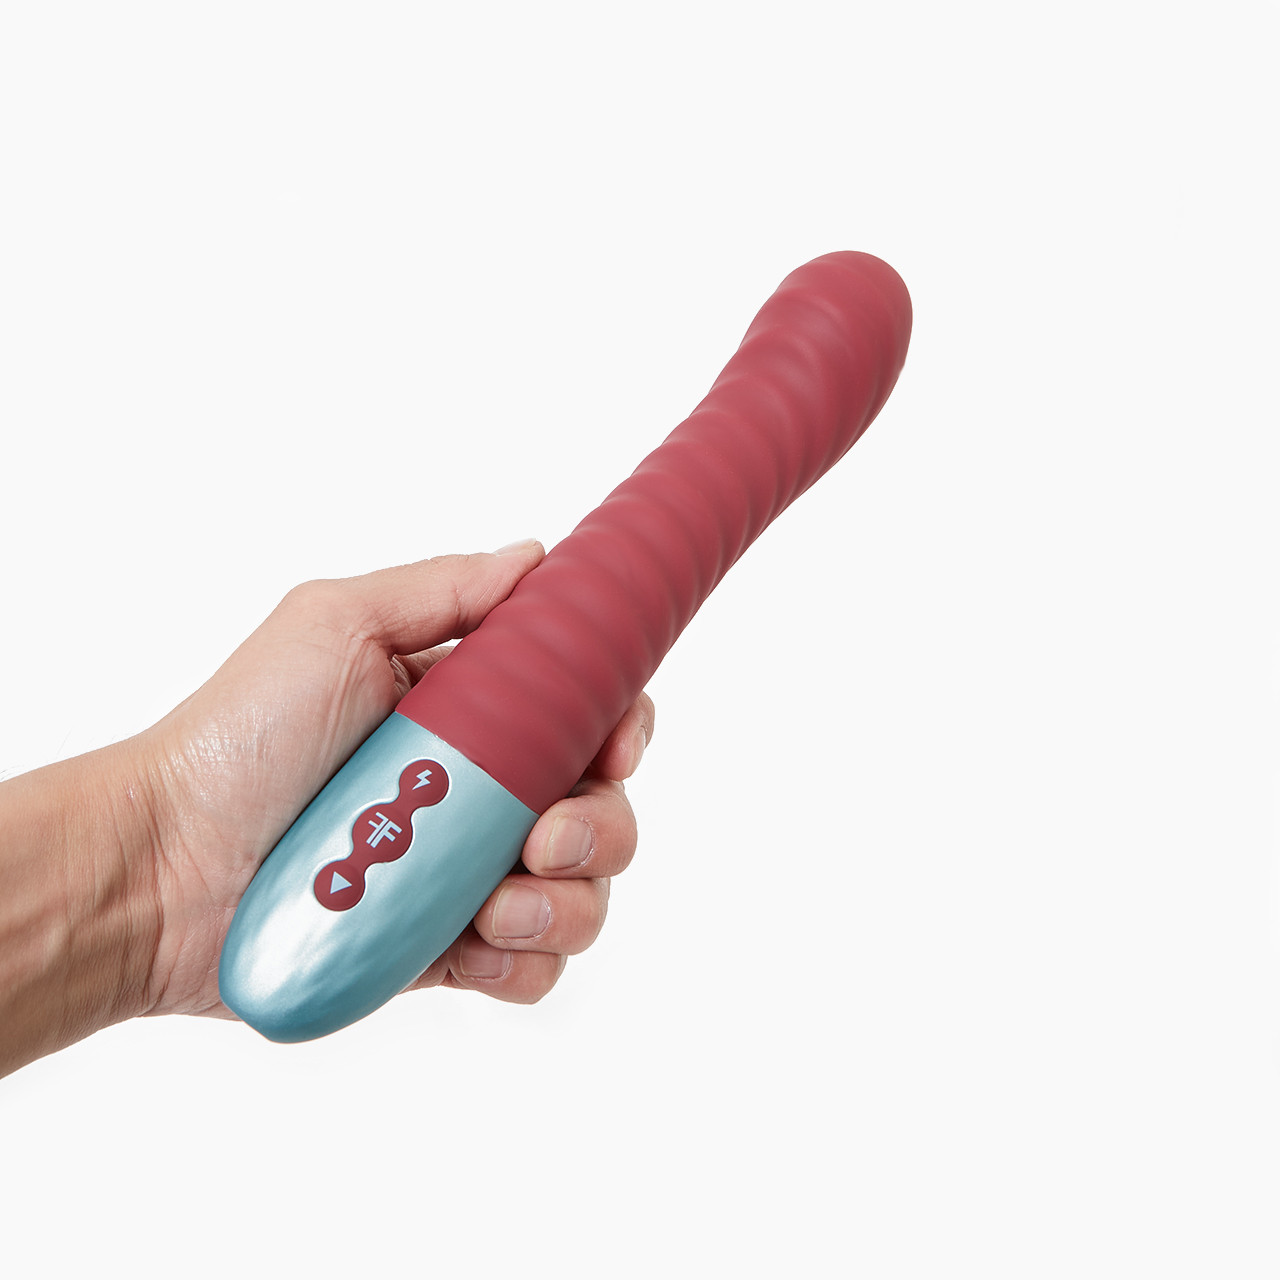 The 'Lola G G-spot Vibrator', a curved silicone toy, held in hand with a white backgroud